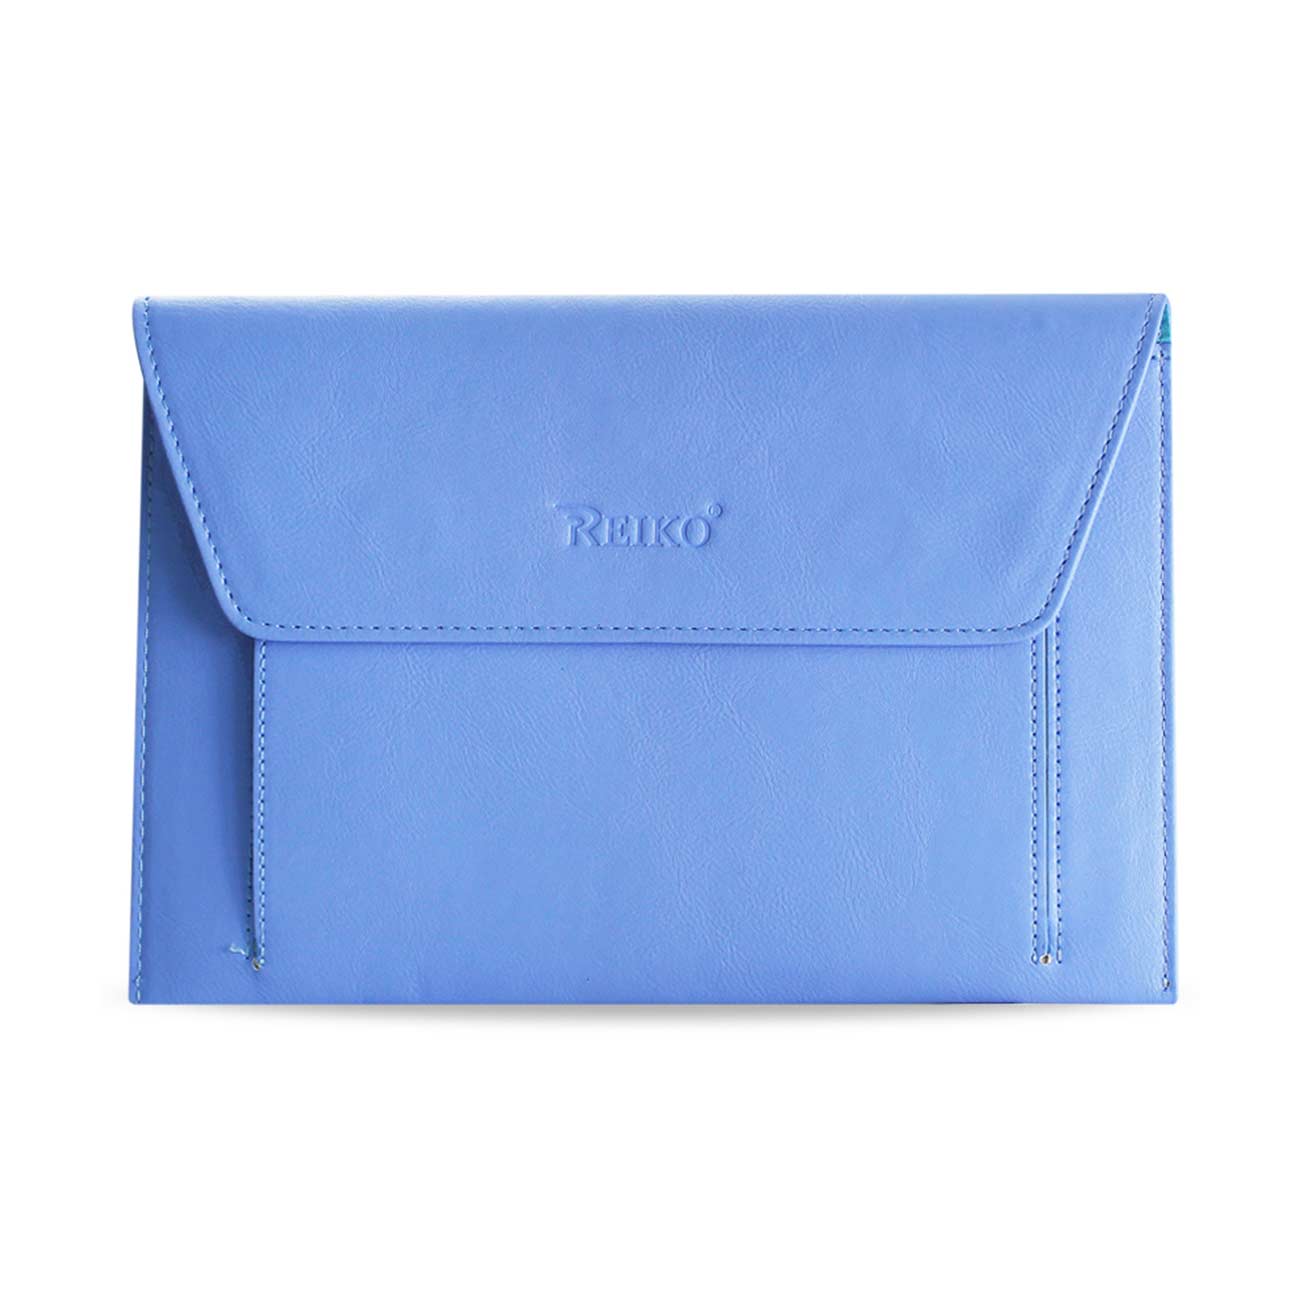 REIKO PREMIUM LEATHER CASE POUCH FOR 7INCHES IPADS AND TABLETS In BLUE